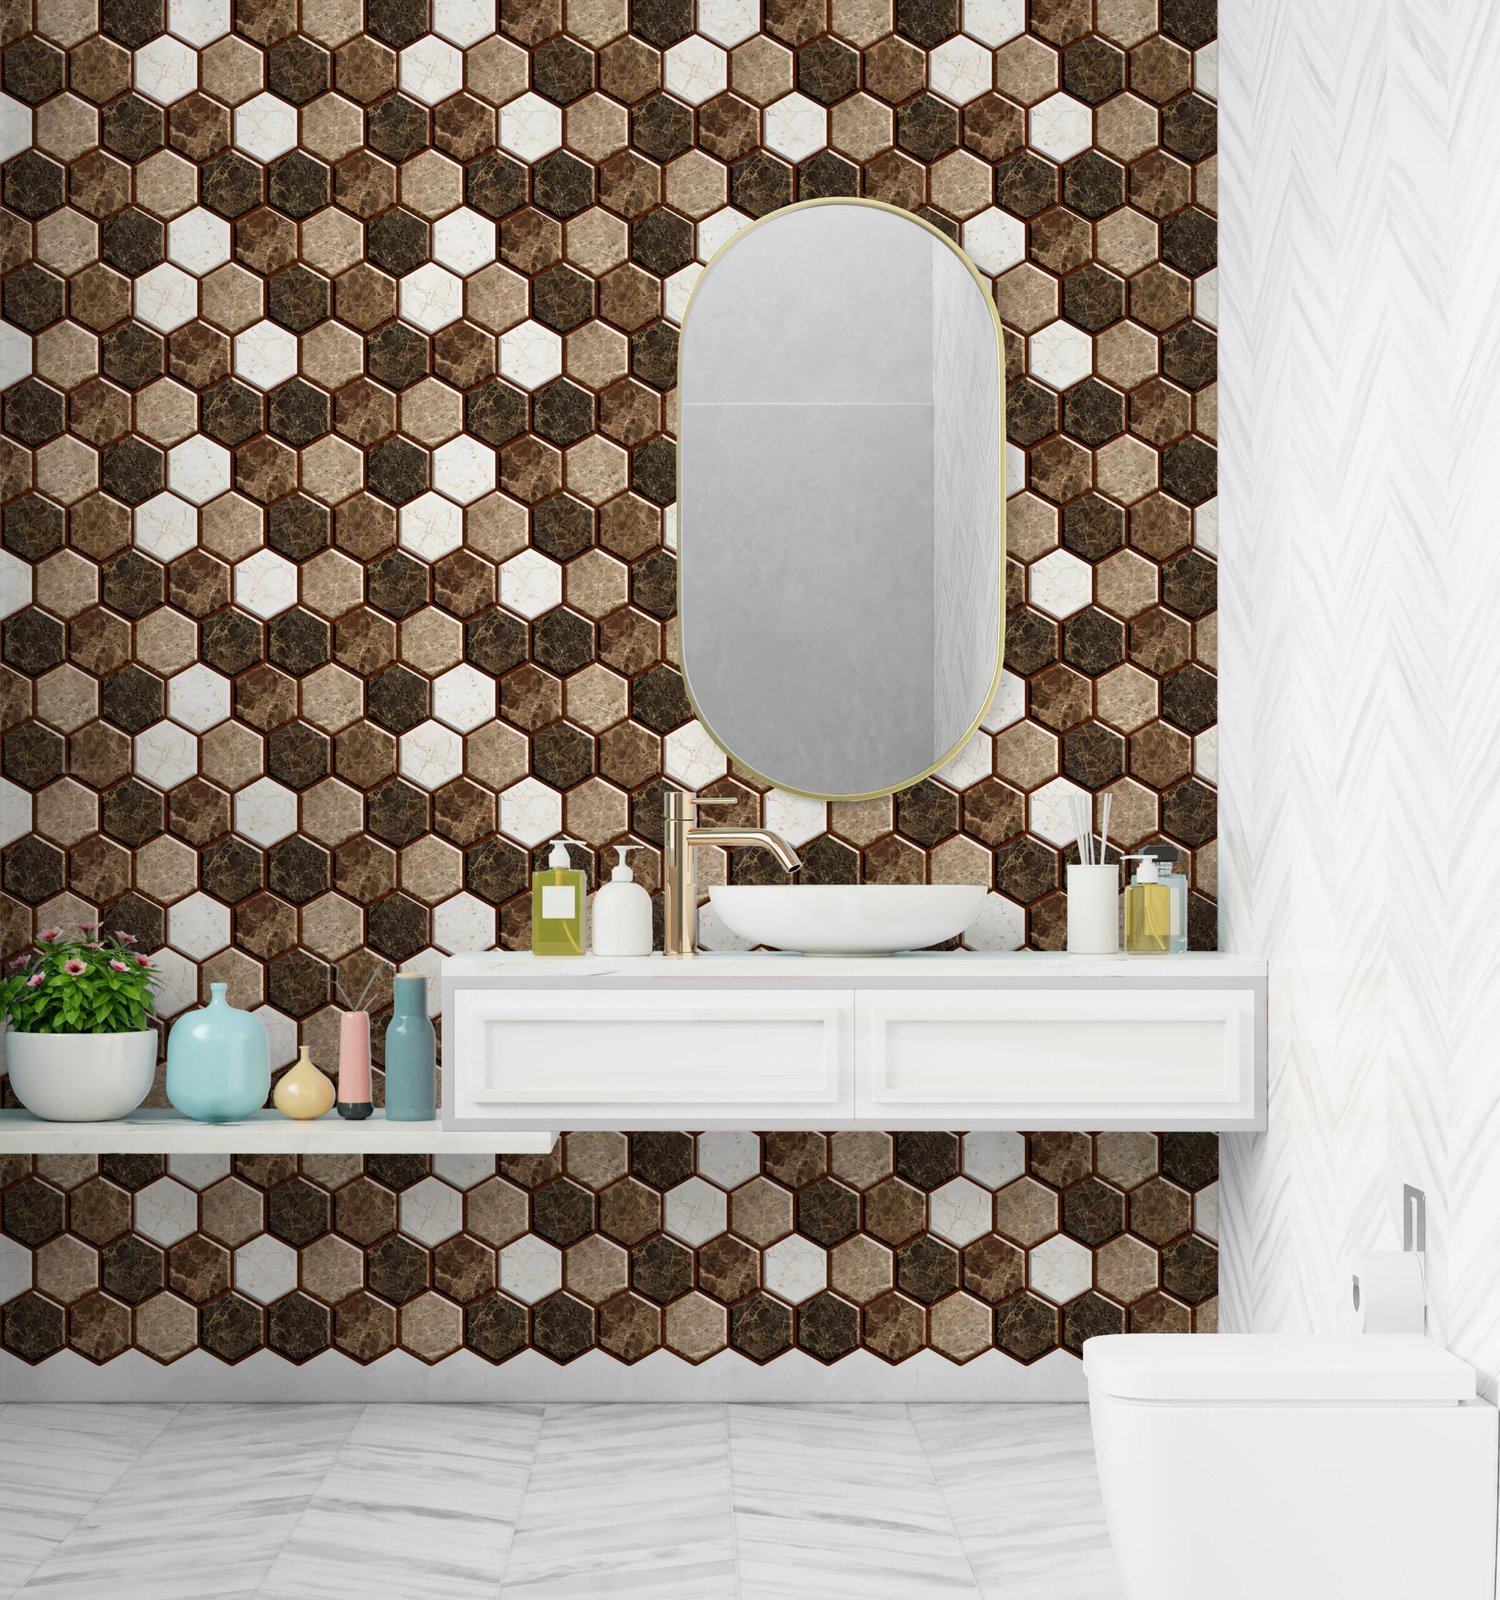 Peel and Stick 3D Tiles Marble Hexagon Peel and Stick Tiles - Mosaicowall Mosaicowall Marble Hexagon Peel and Stick Tiles